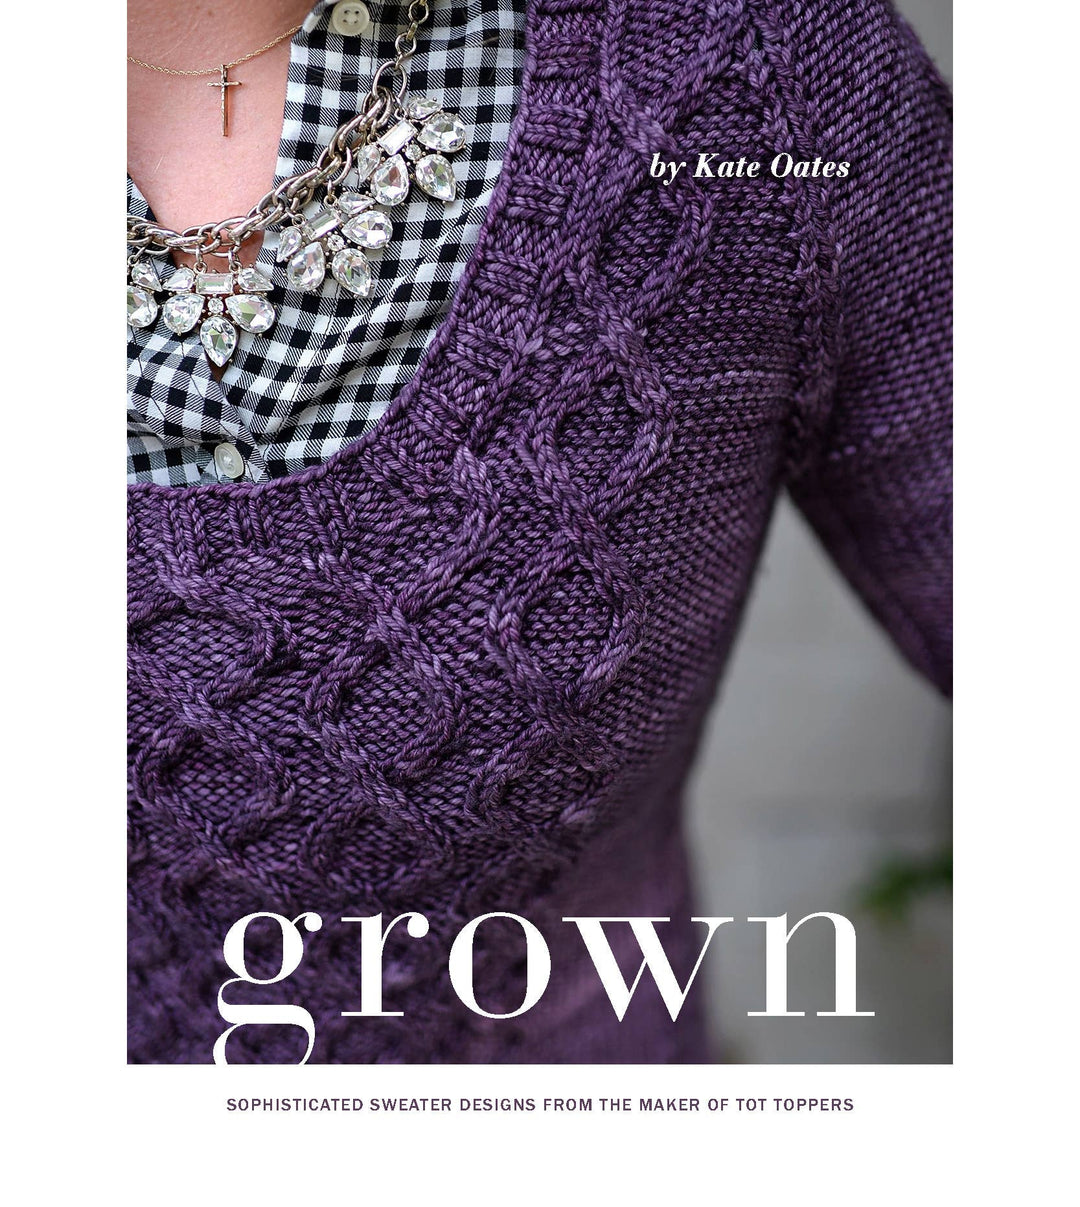 Grown (Softcover)